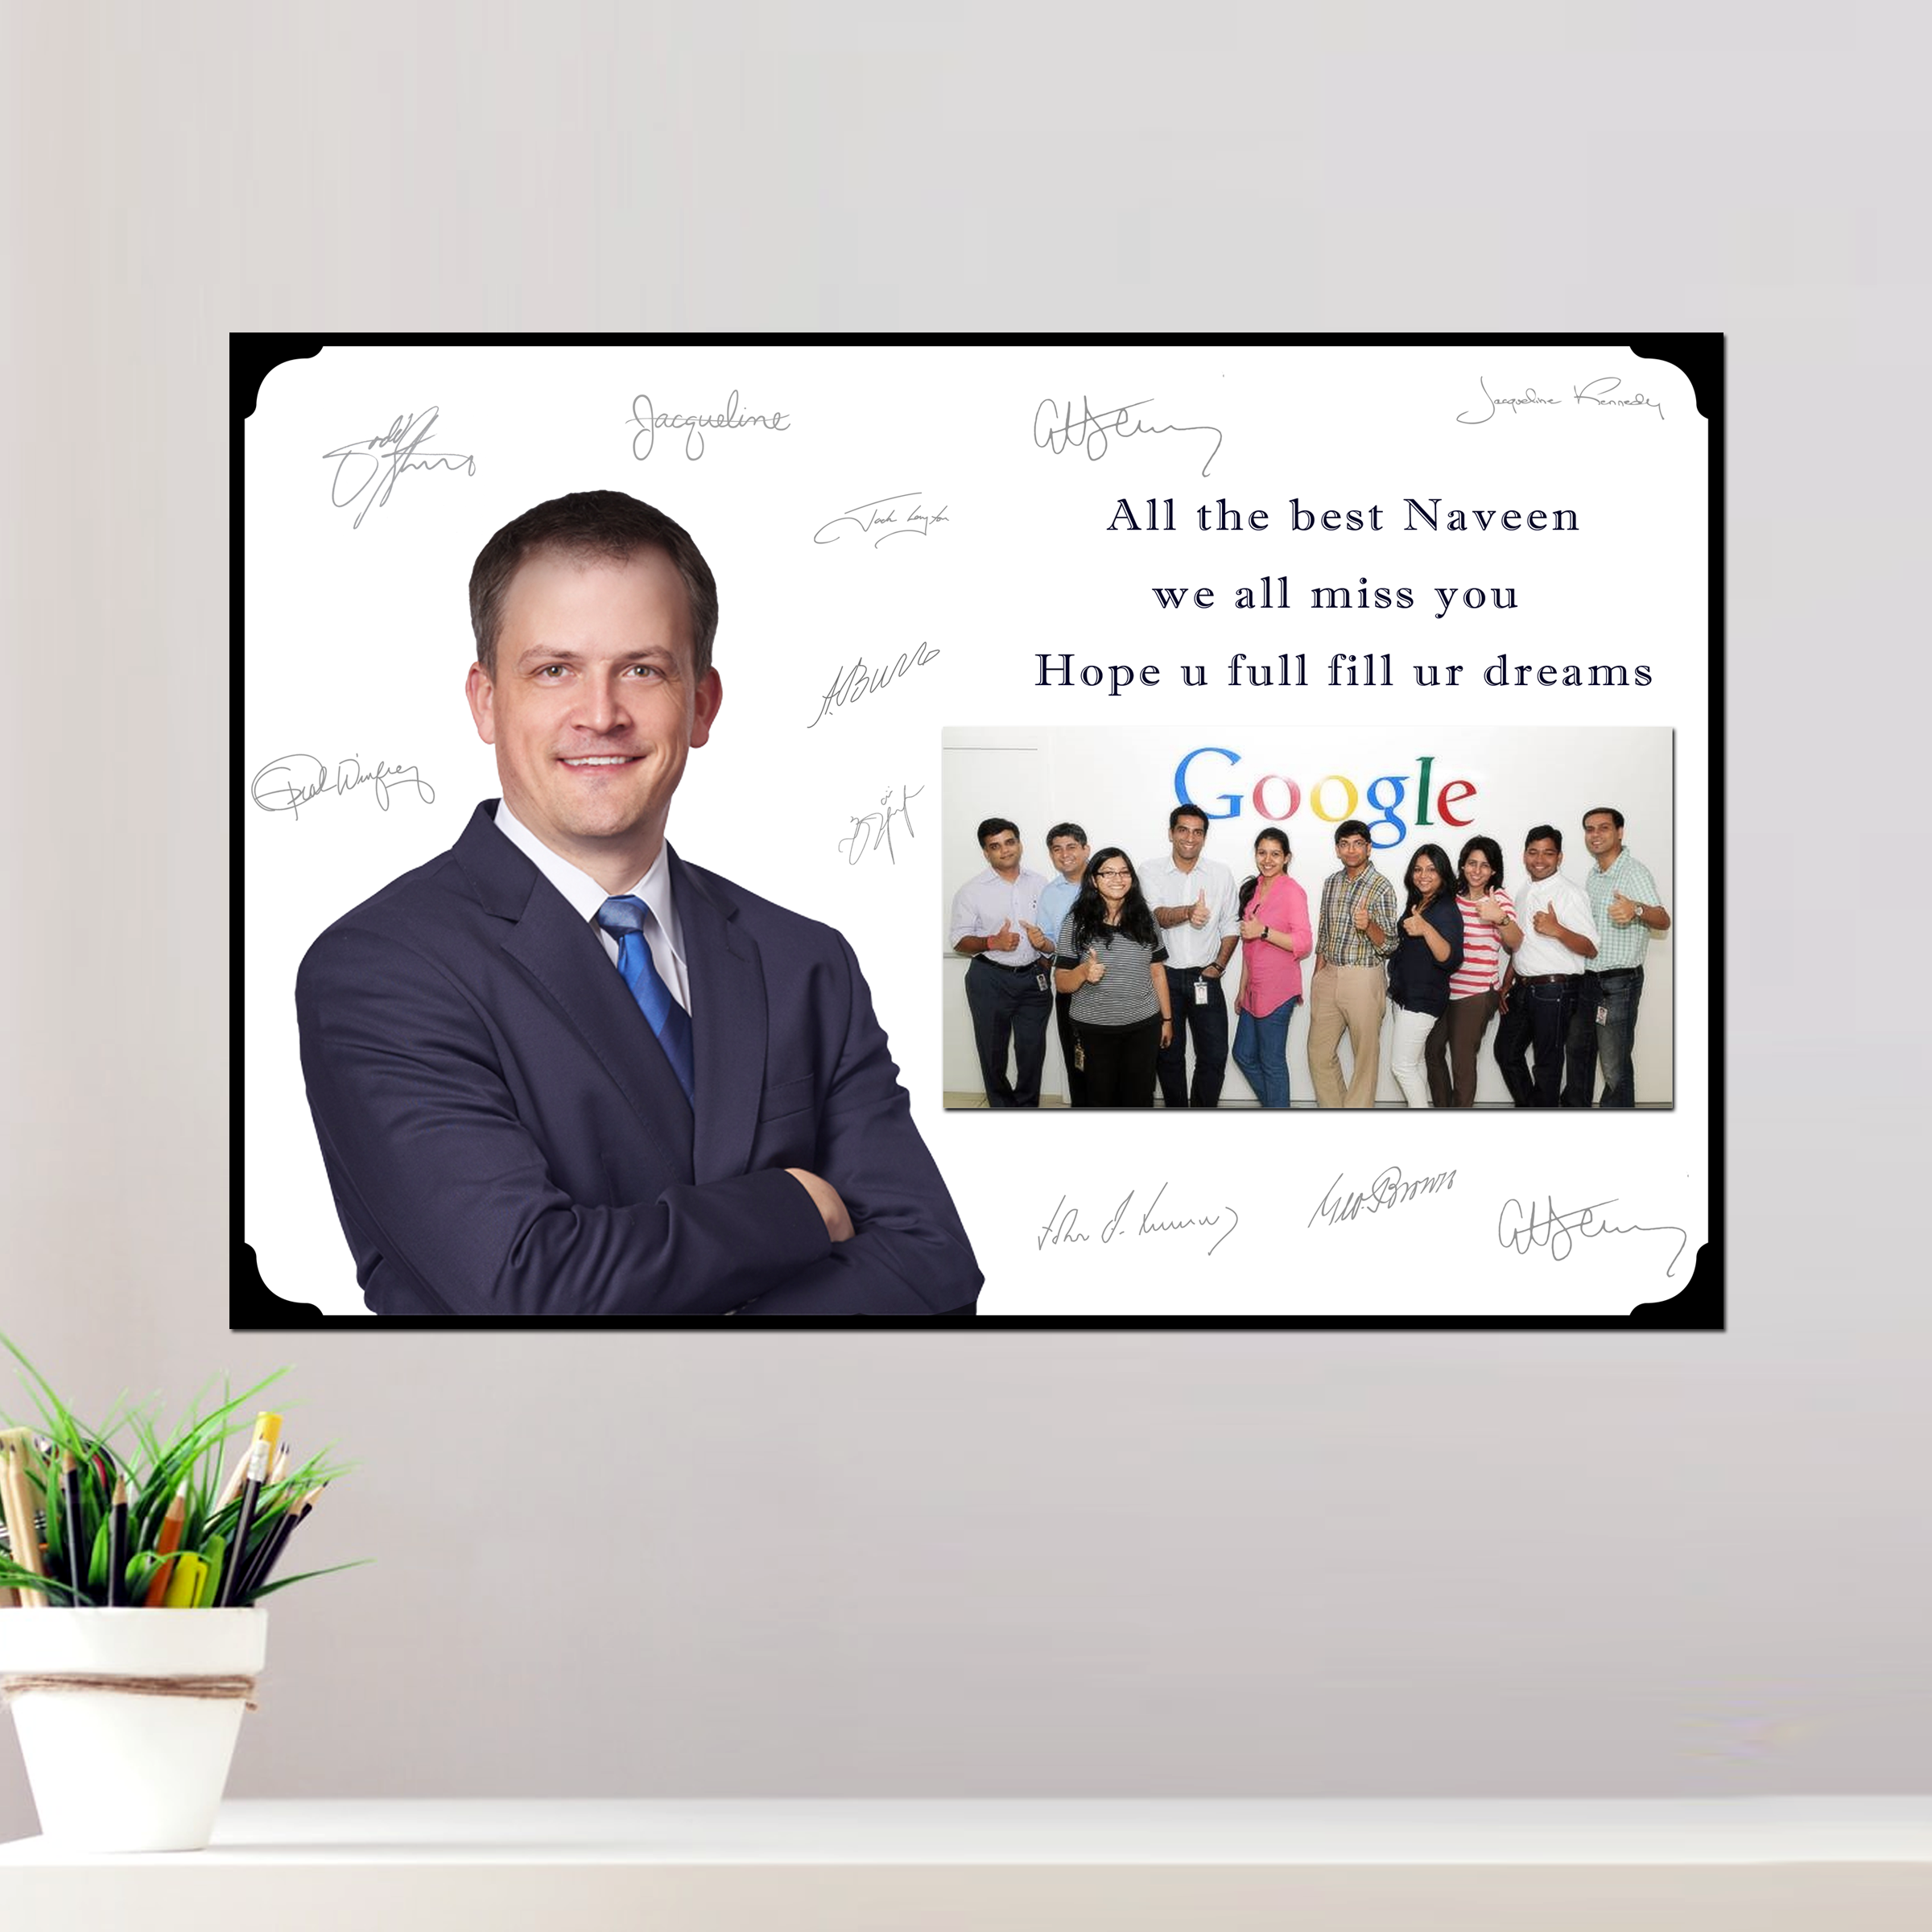 Buy Personalized A4 Wooden Finish Photo Memoir, Document, cum Certificate  Frame - For Corporate Gifting, Employee Appreciation, Office Desk, Farewell  Gifts - JAPS5011A4 online - The Gifting Marketplace